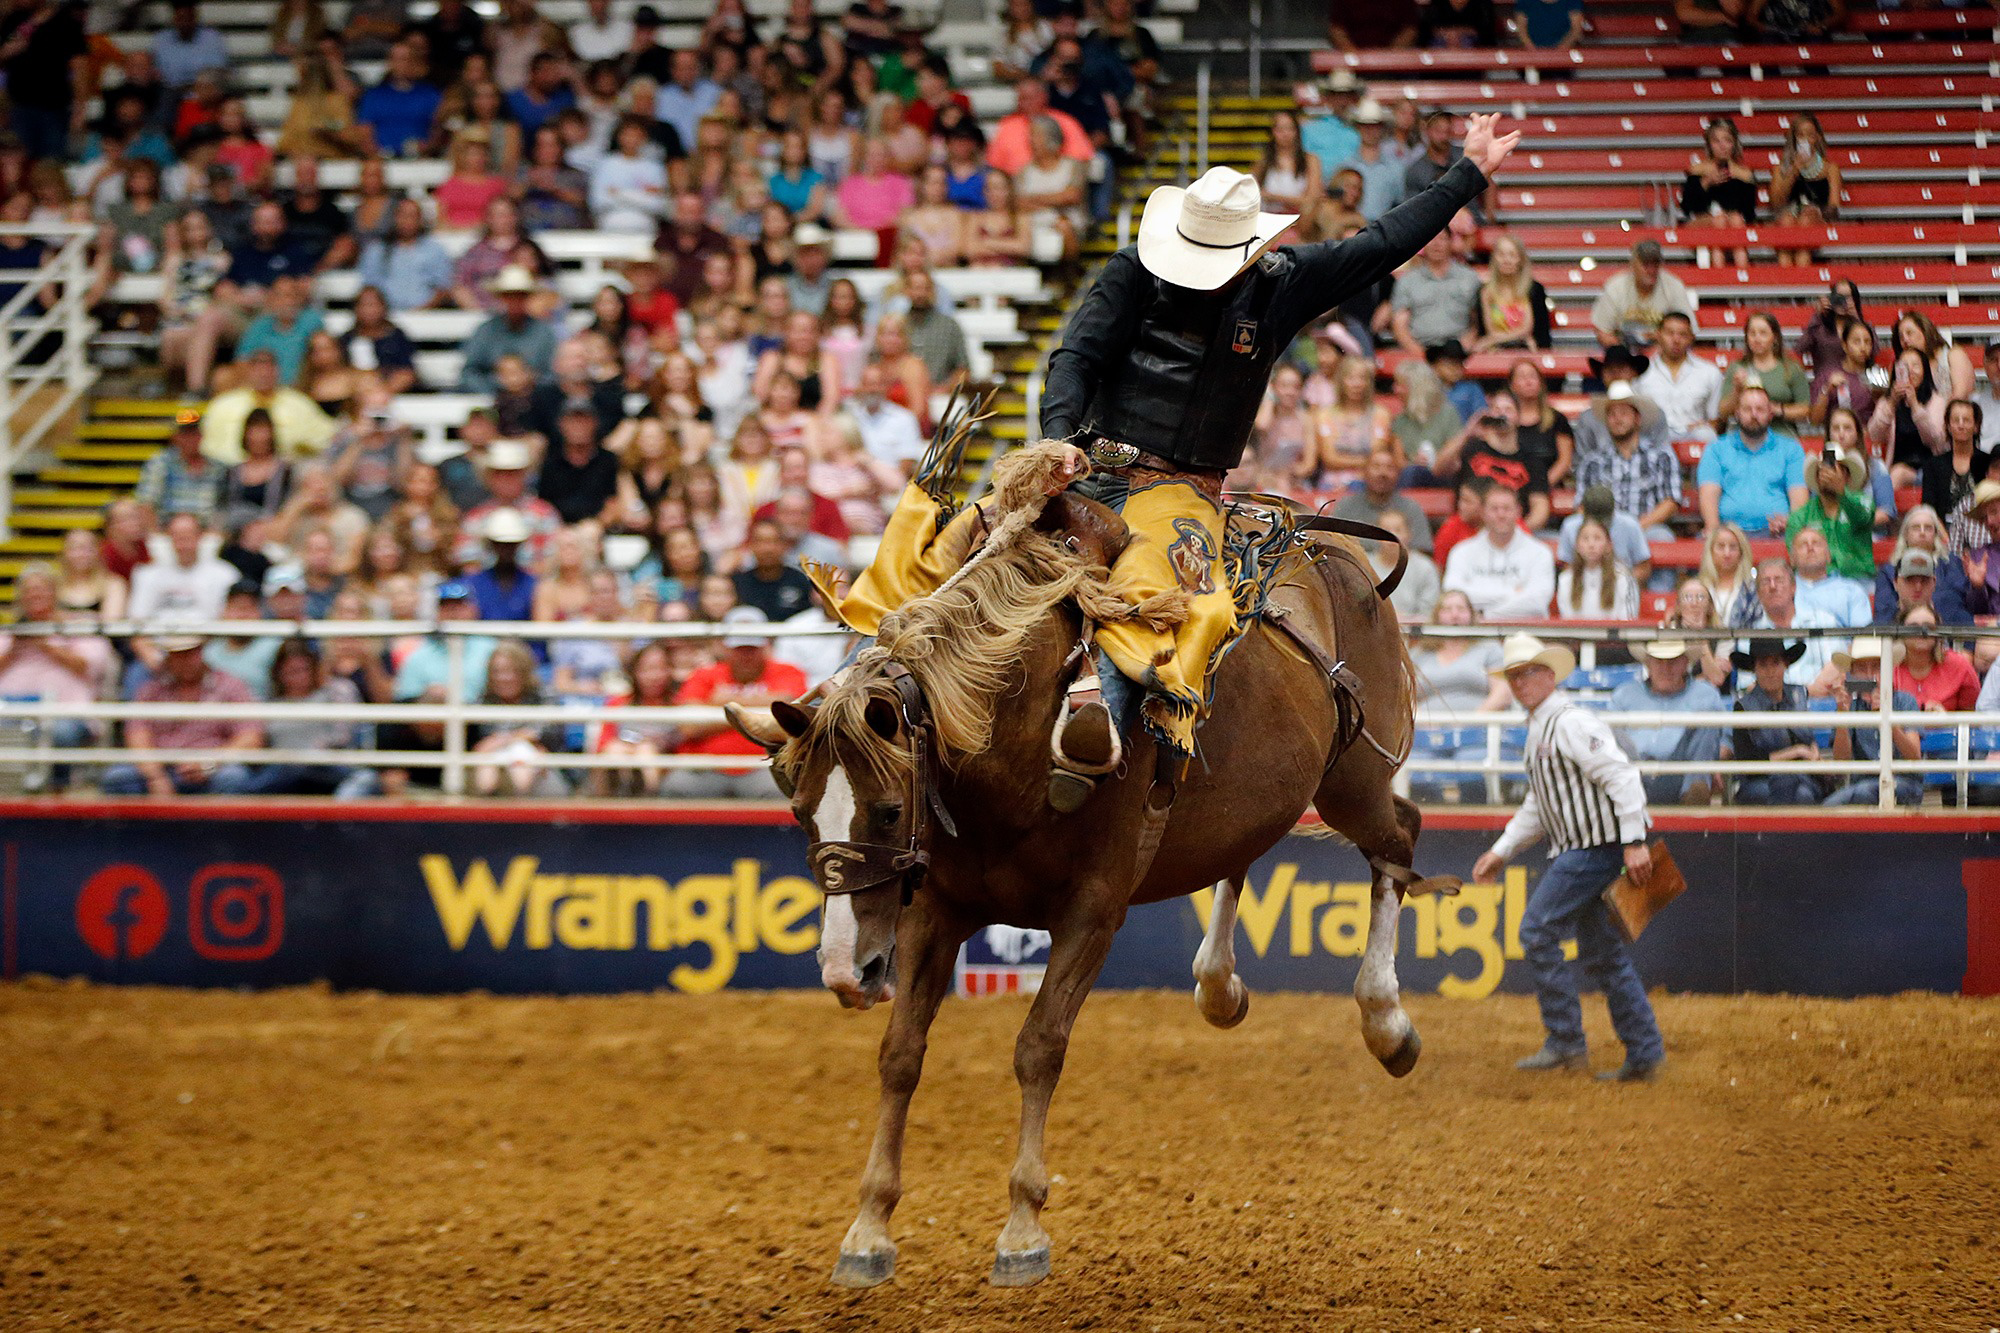 the-mesquite-championship-rodeo-keeps-authentic-texan-traditions-alive